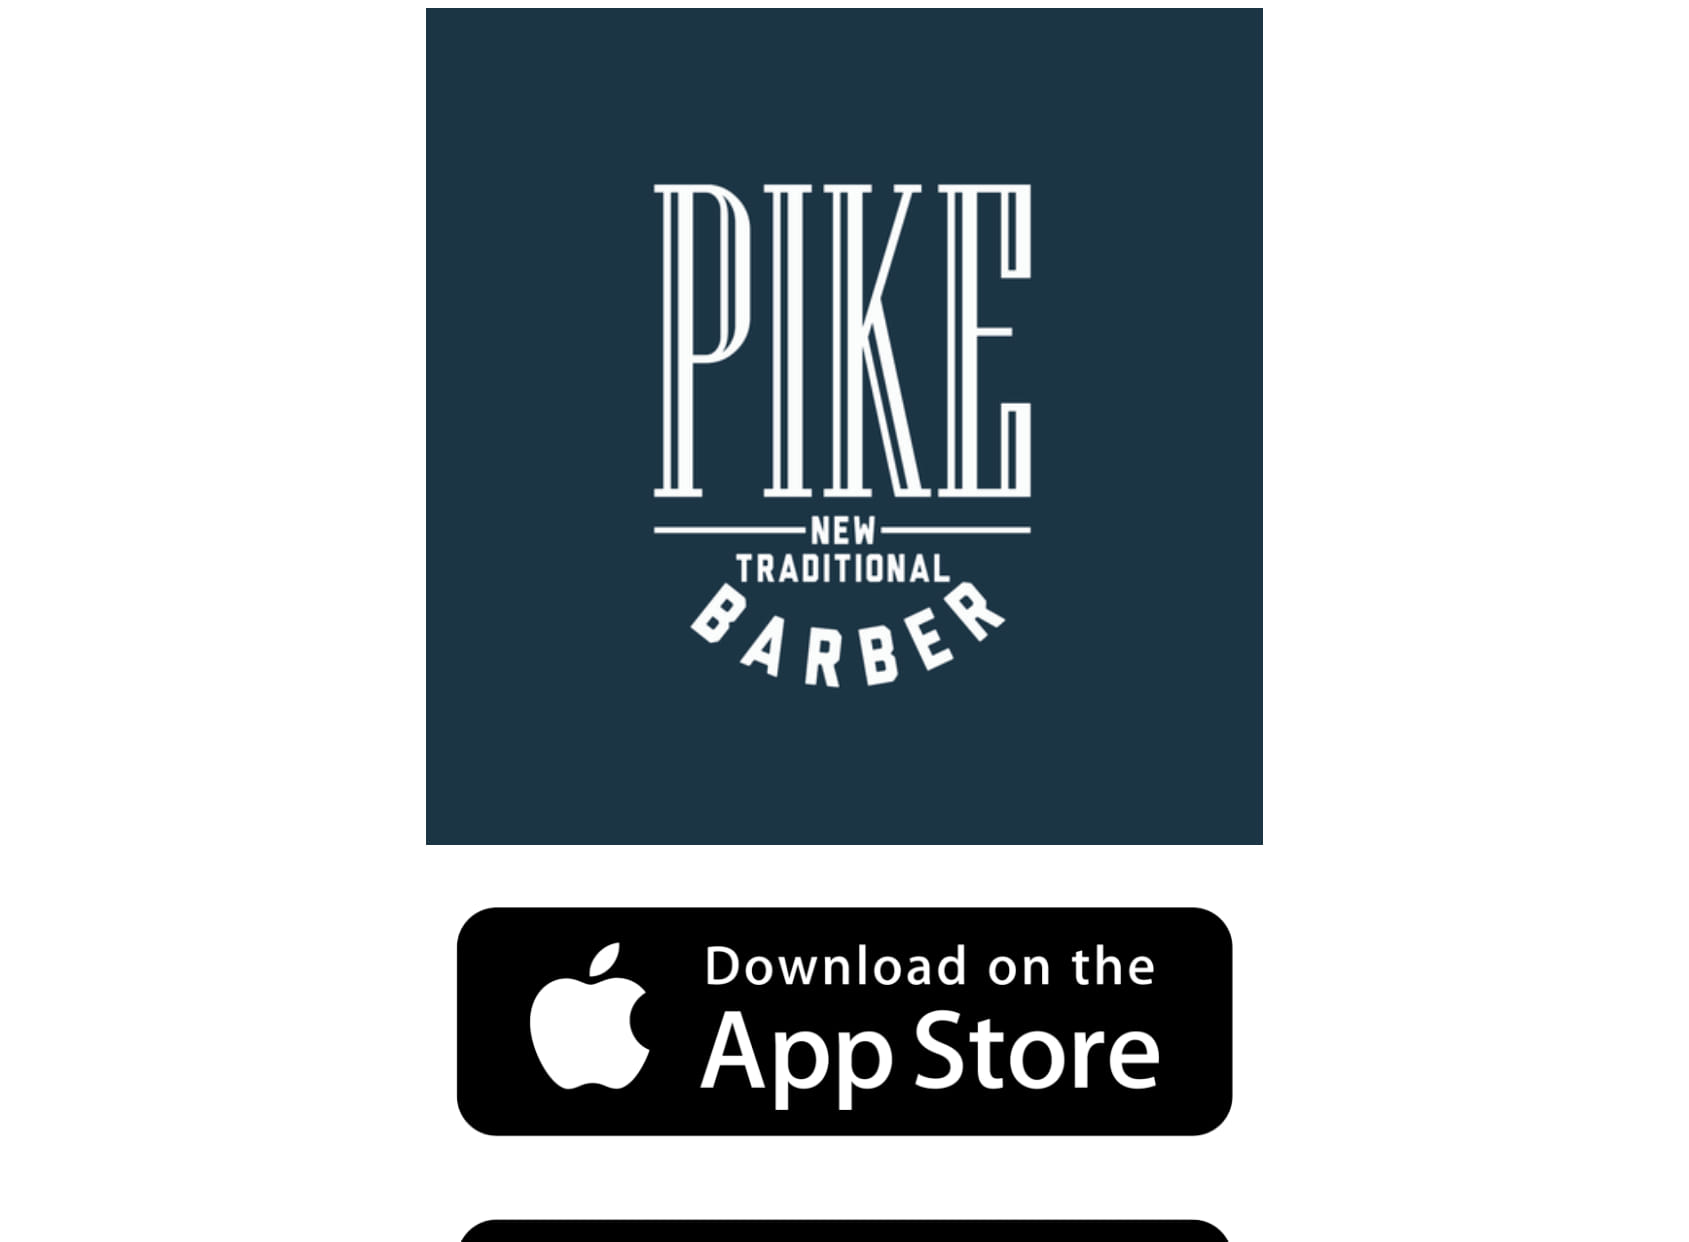 Pike - New Traditional Barber